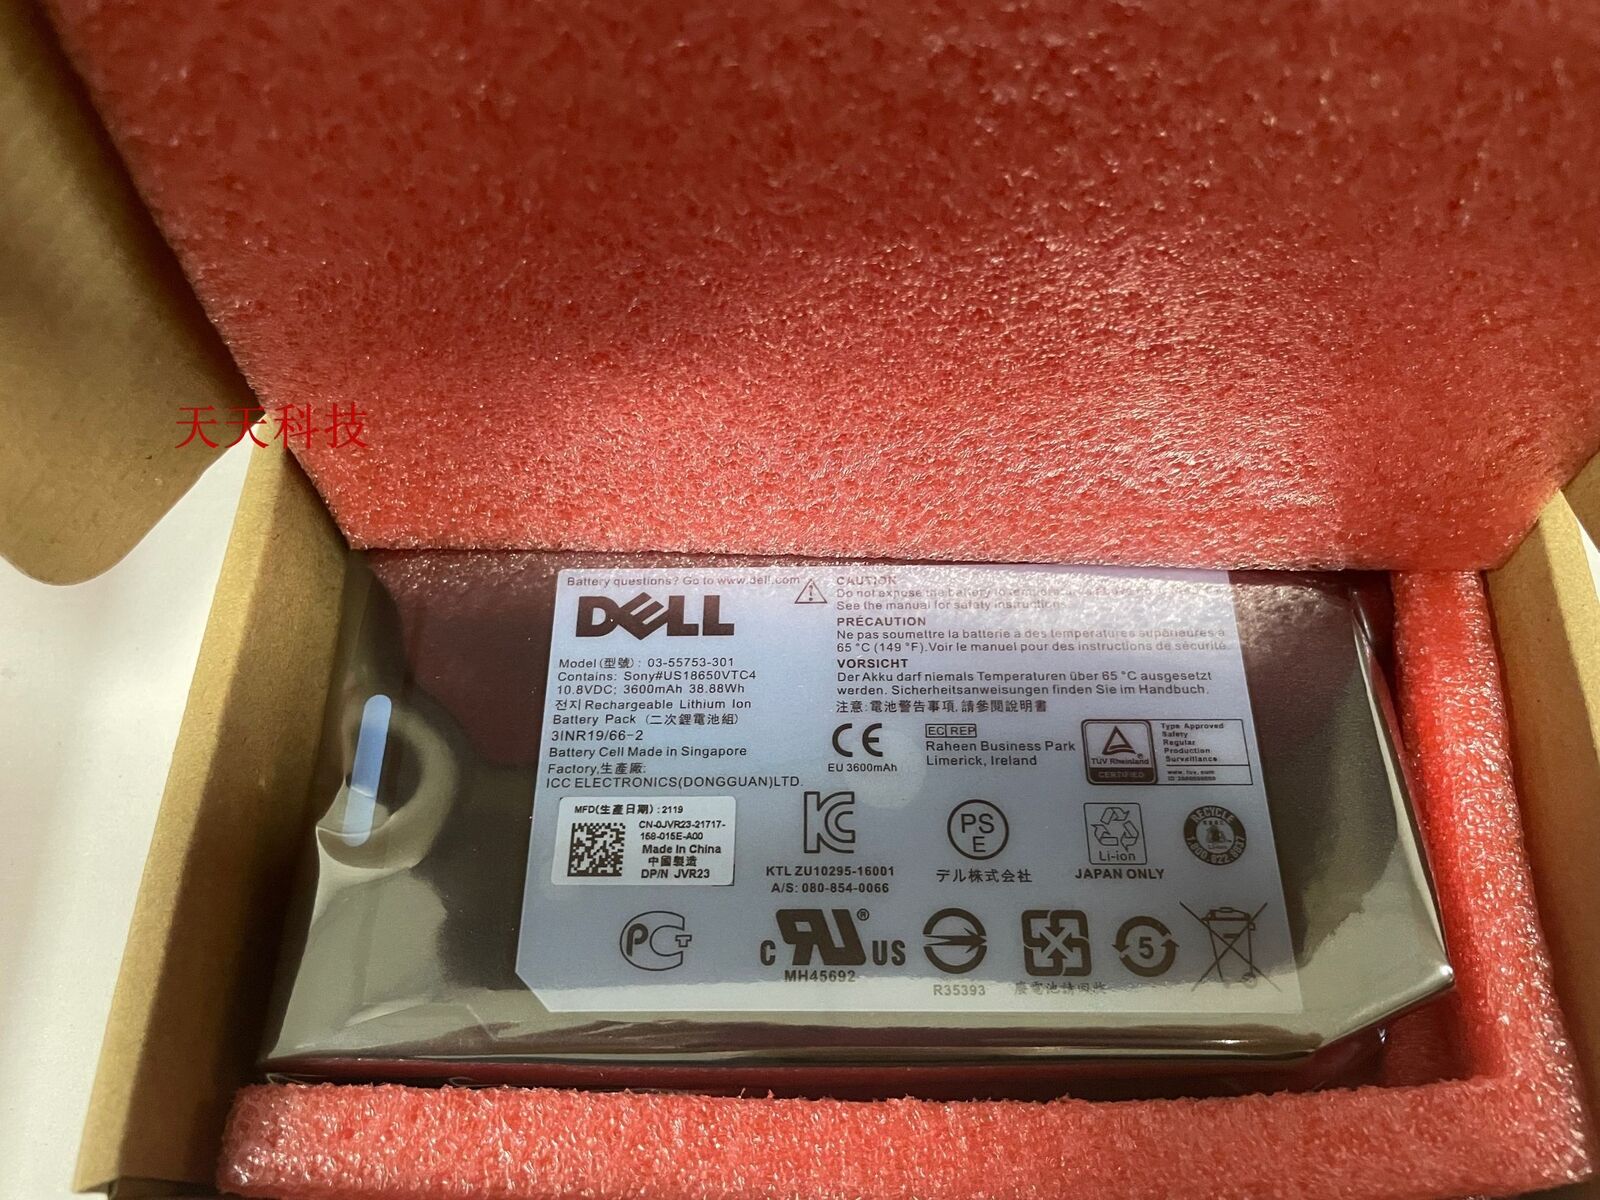 Dell SCV3020 JVR23 03-55753-301 3600mAh Rechargeable Battery Date 2023